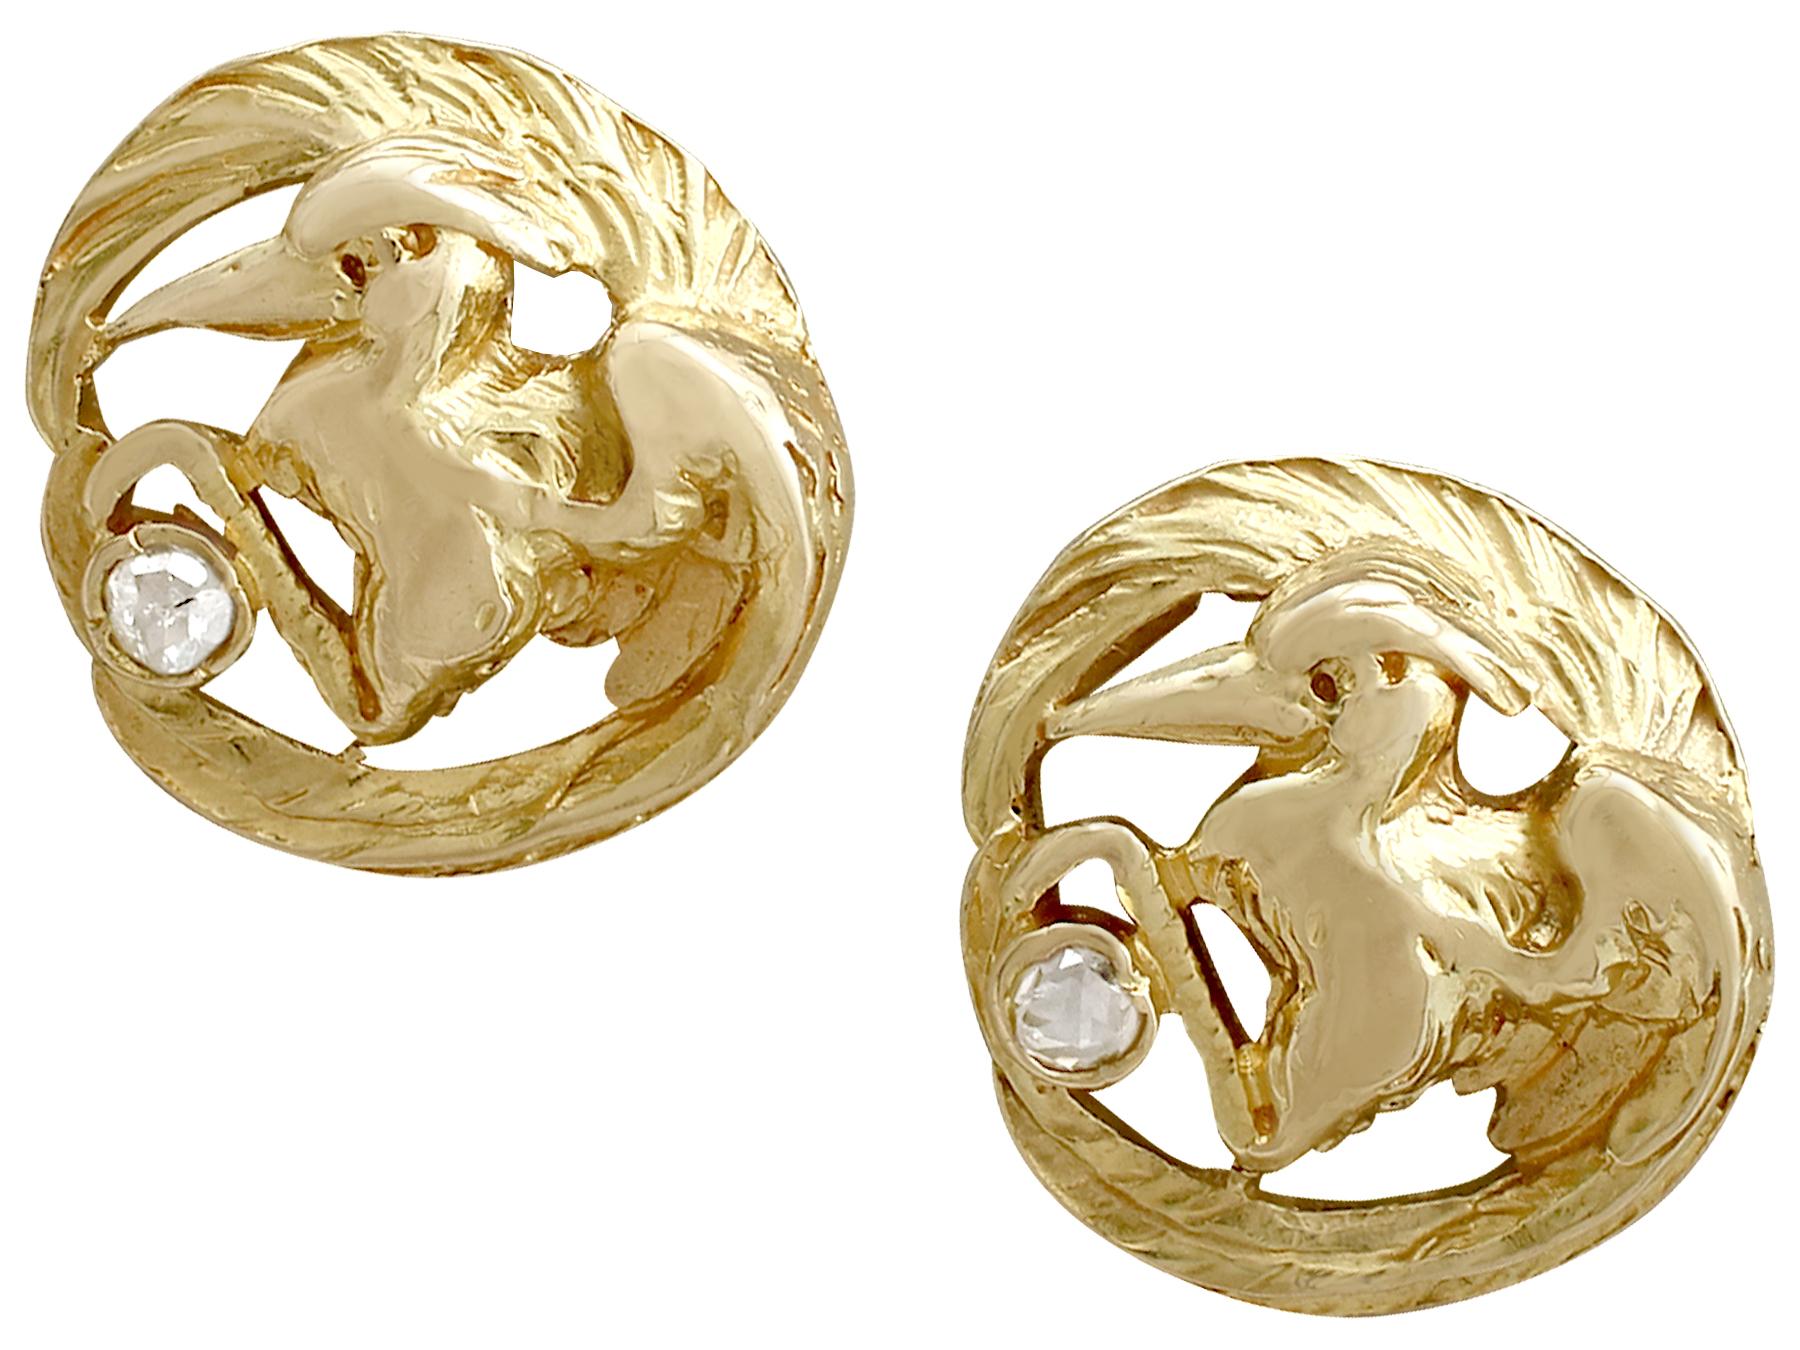 Antique 1900s Pair of 18k Yellow Gold Bird Cufflinks In Excellent Condition For Sale In Jesmond, Newcastle Upon Tyne